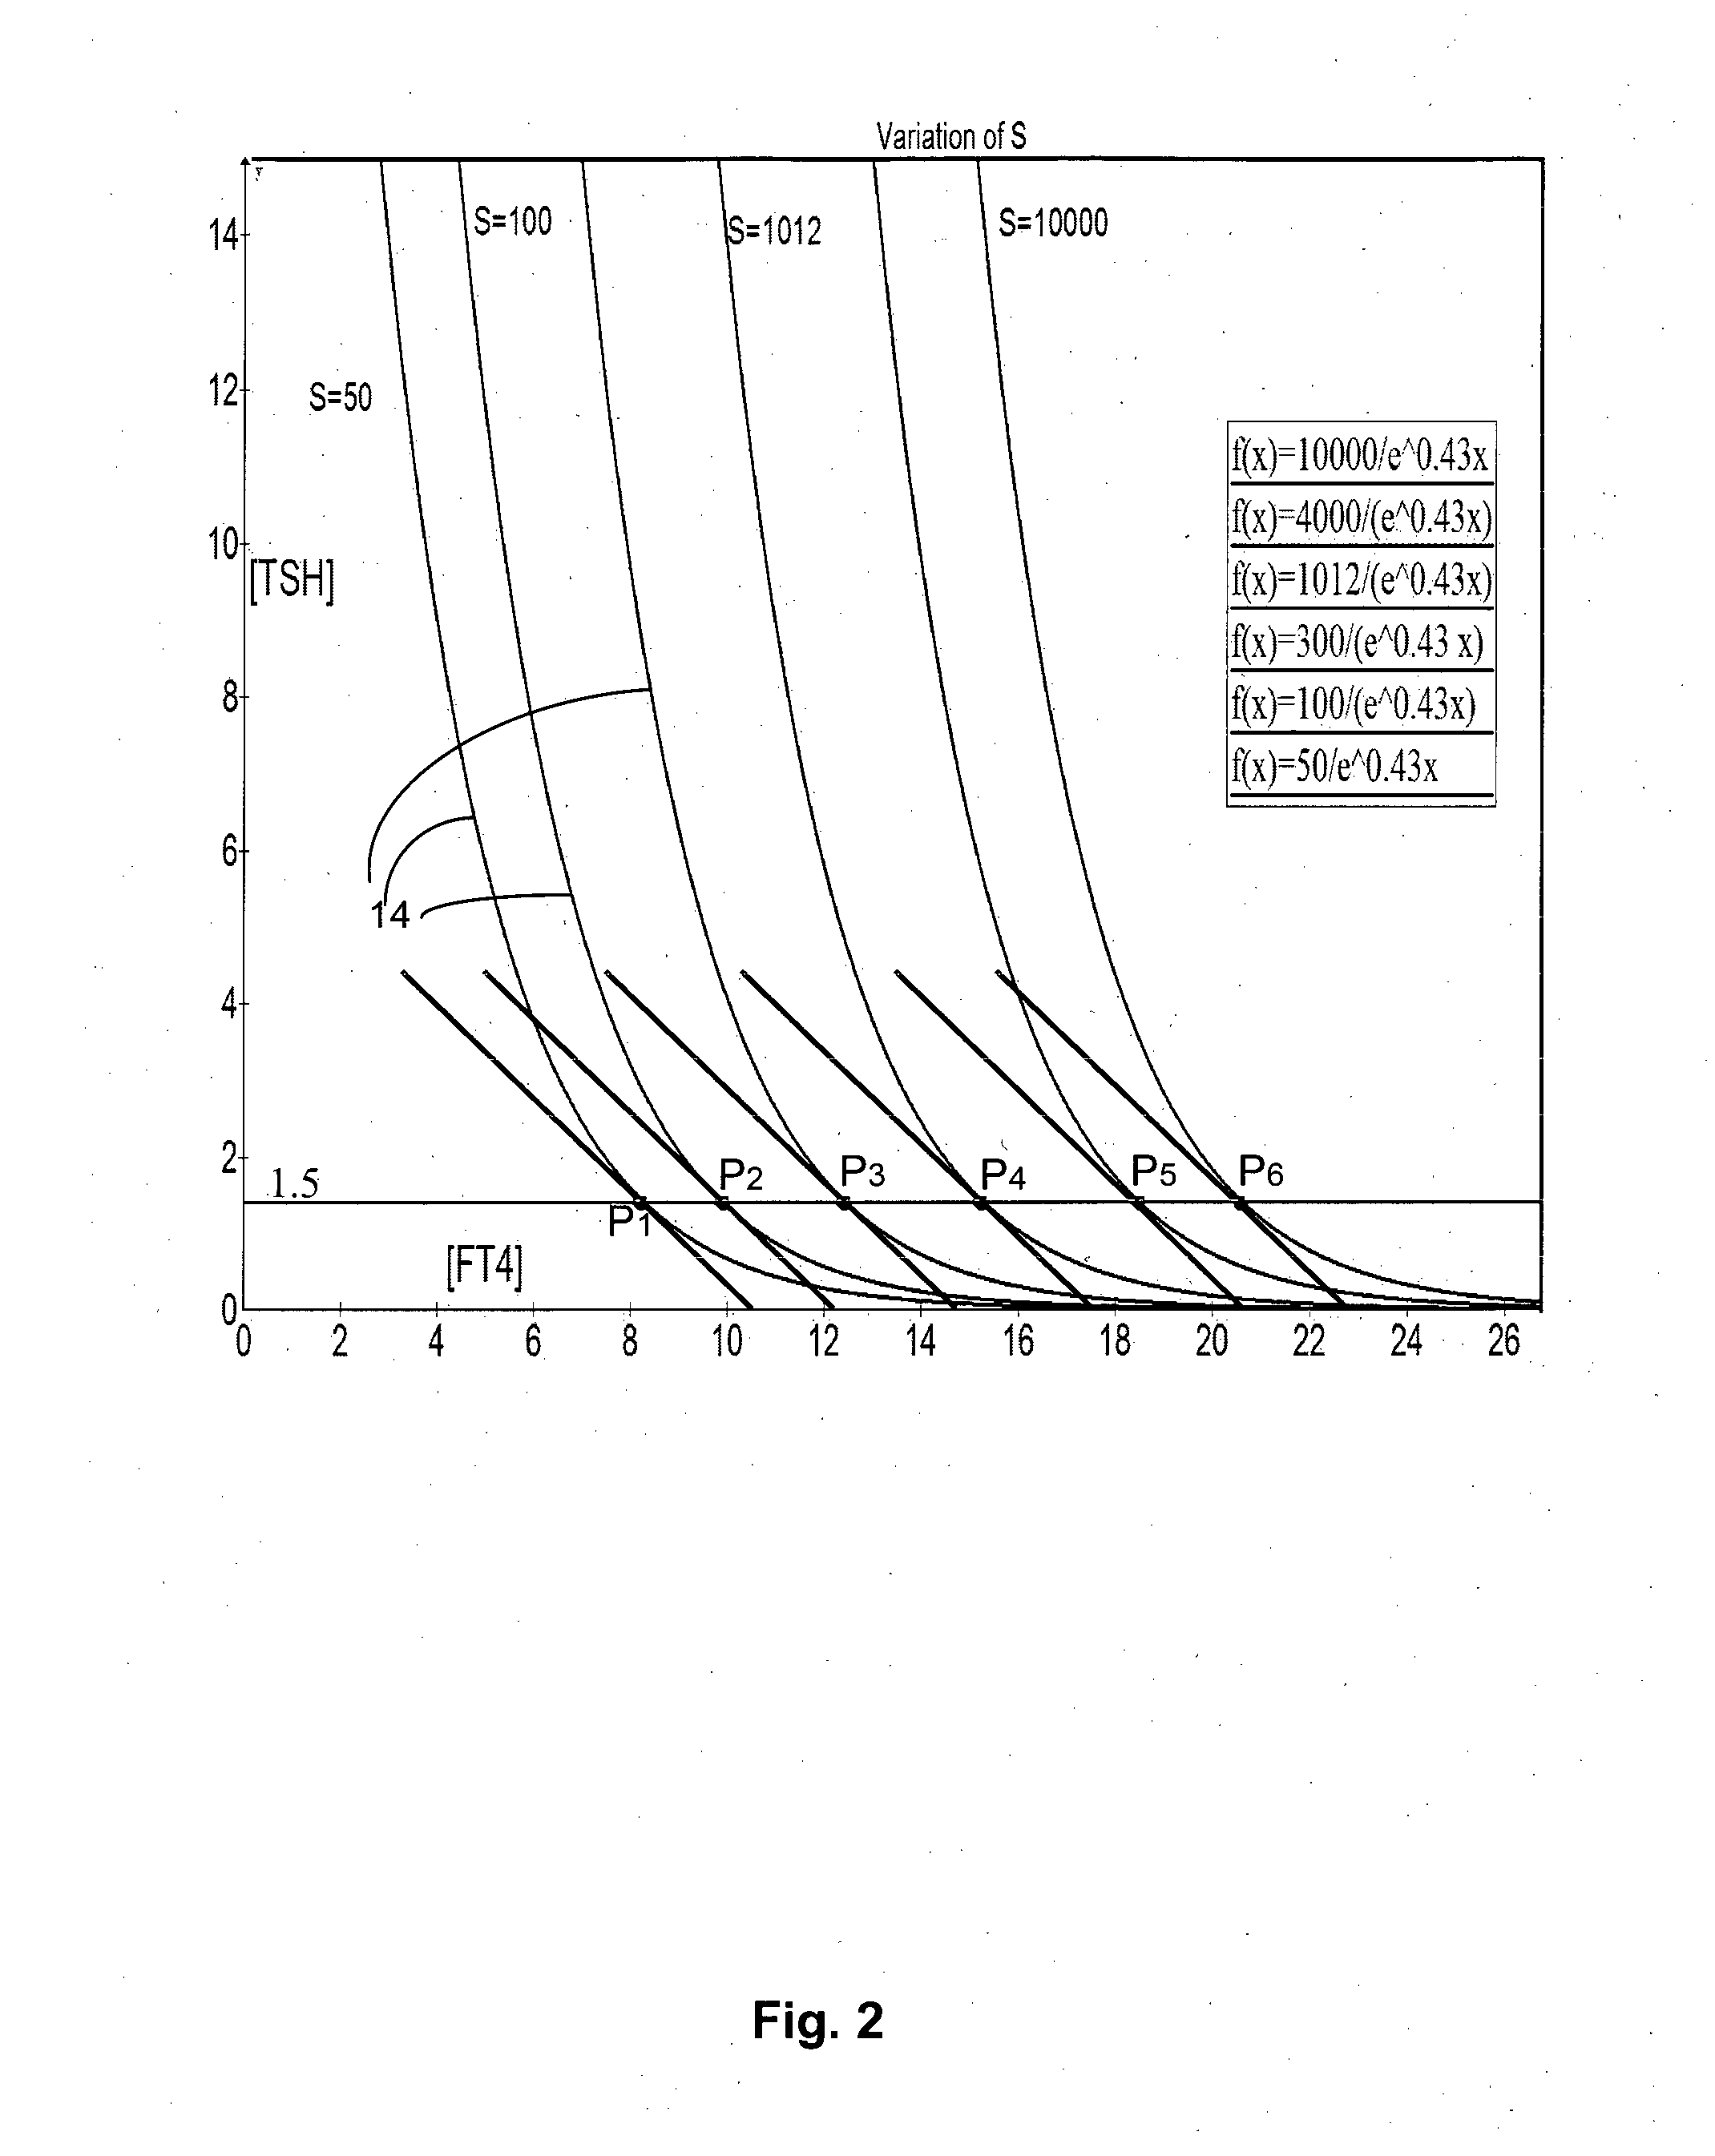 System and method for deriving parameters for homeostatic feedback control of an individual